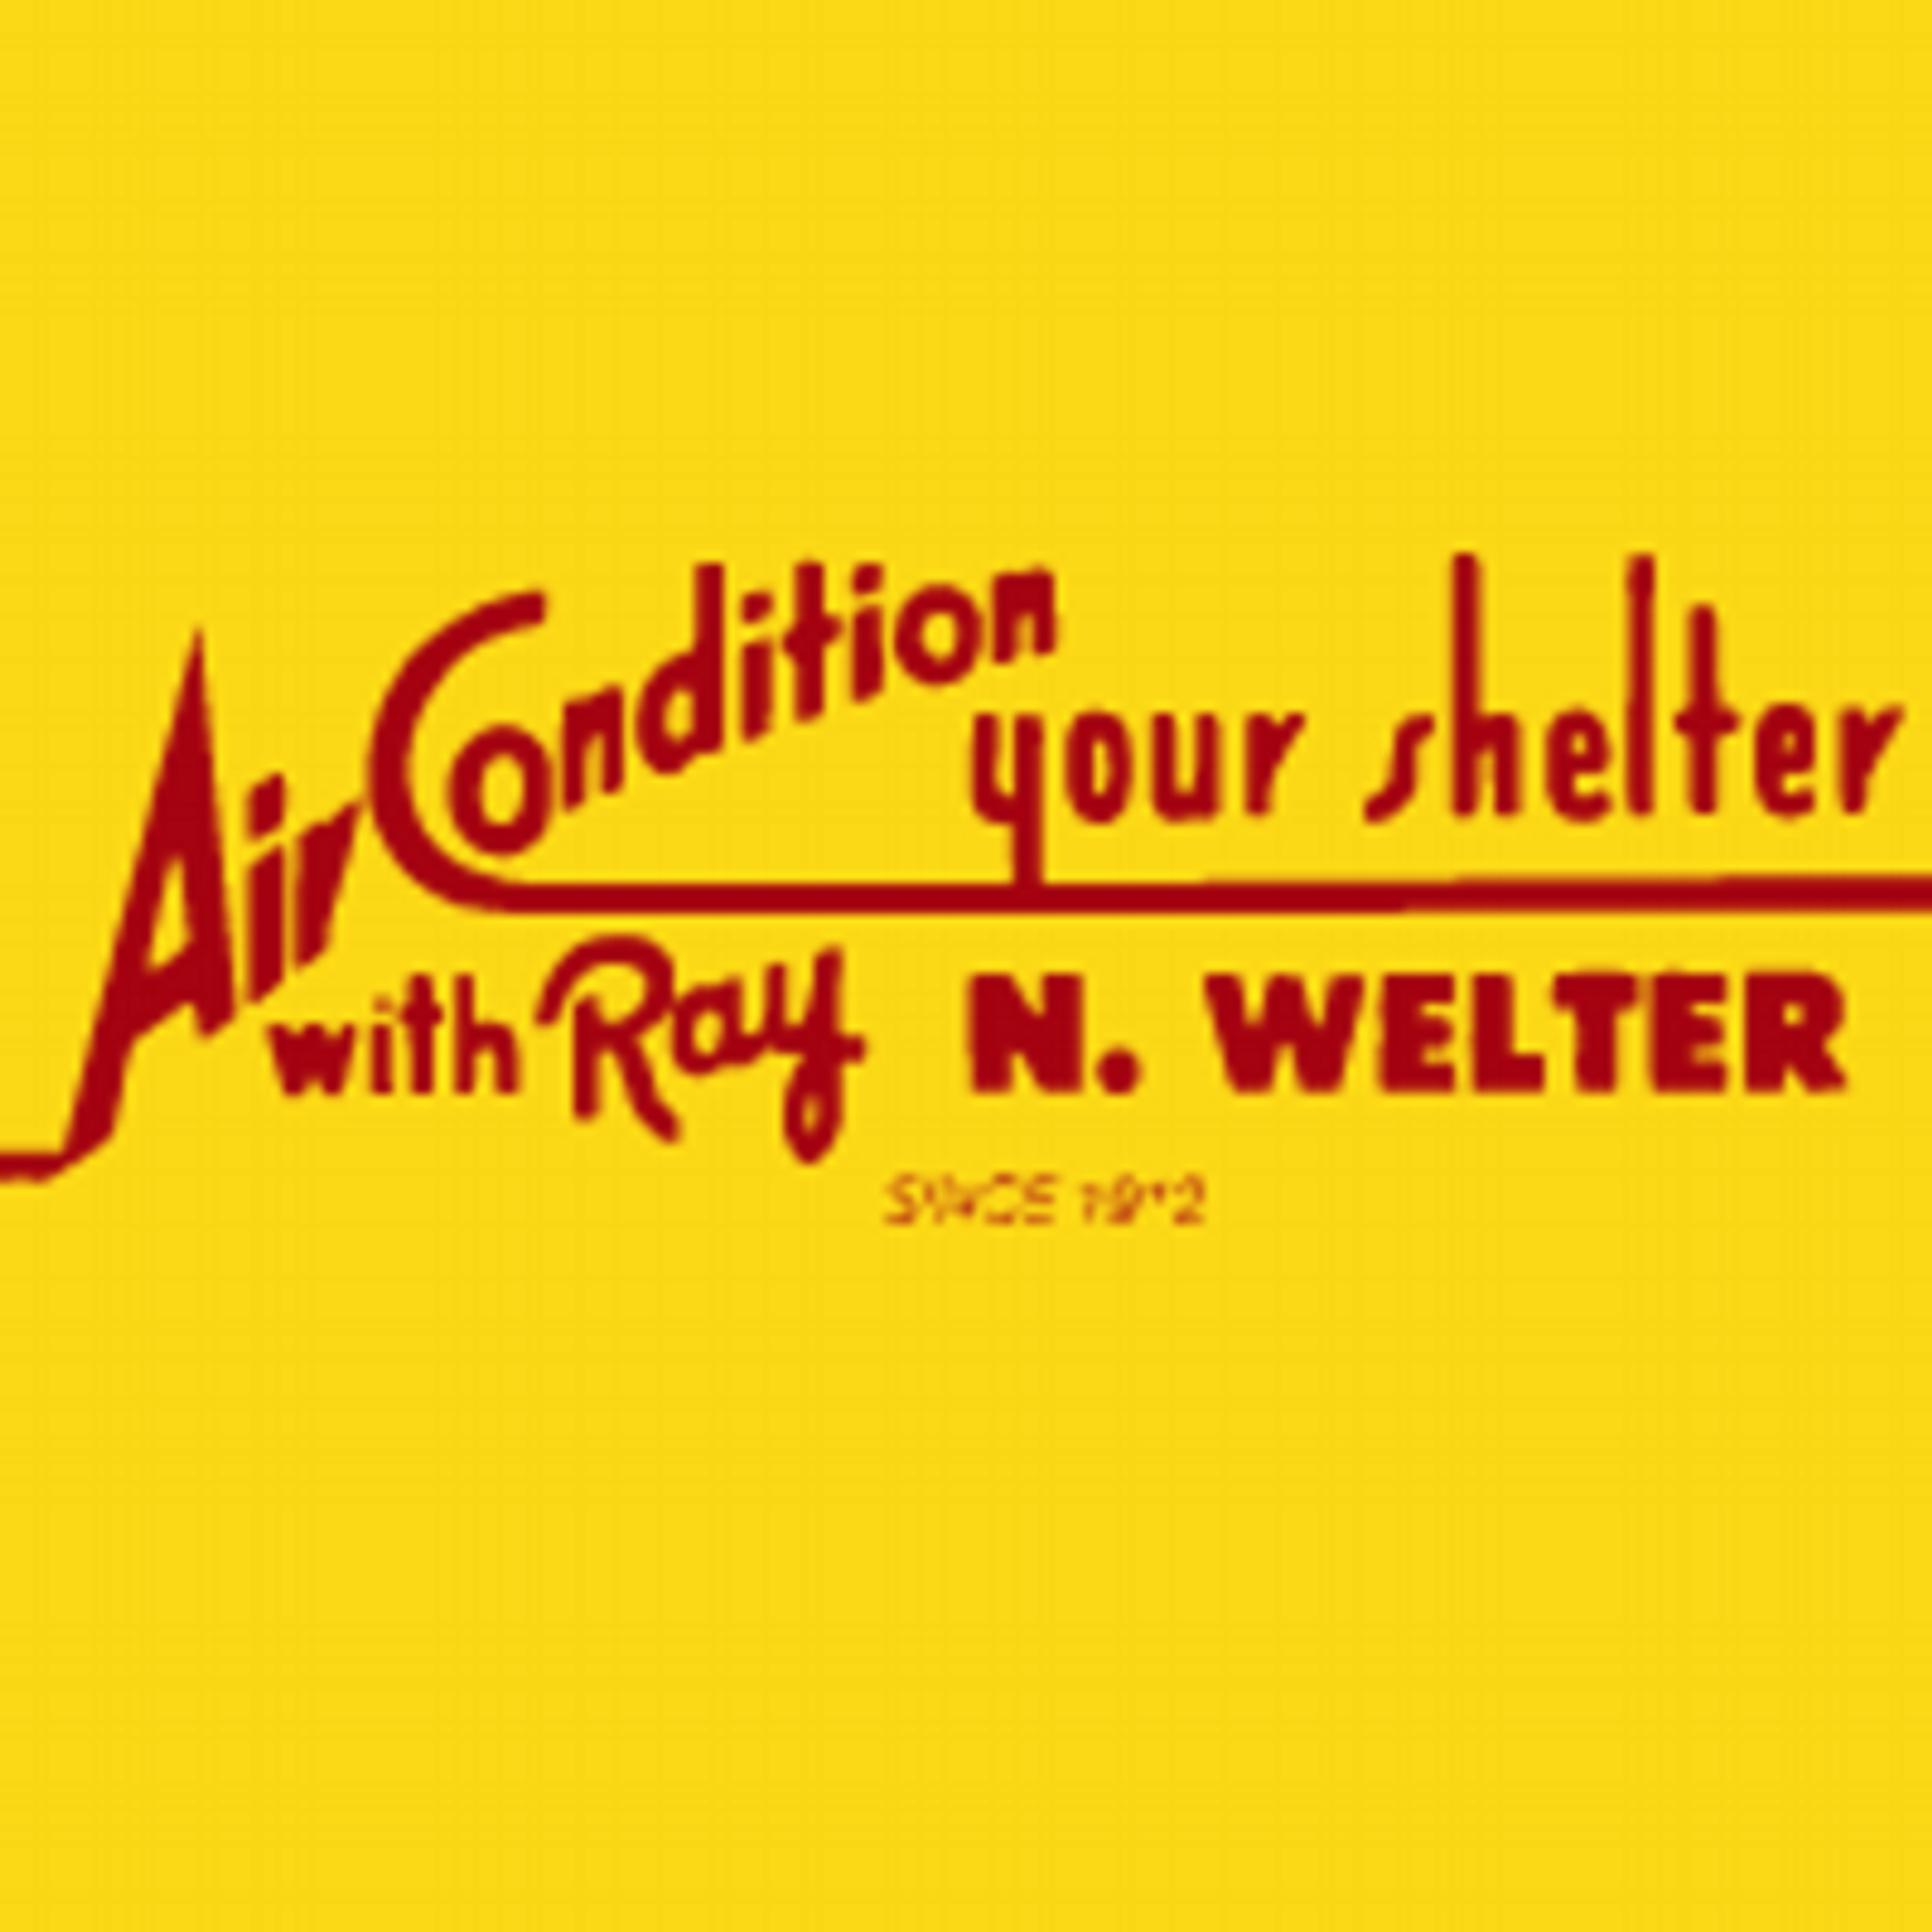 Ray N. Welter Heating and Air Conditioning Company